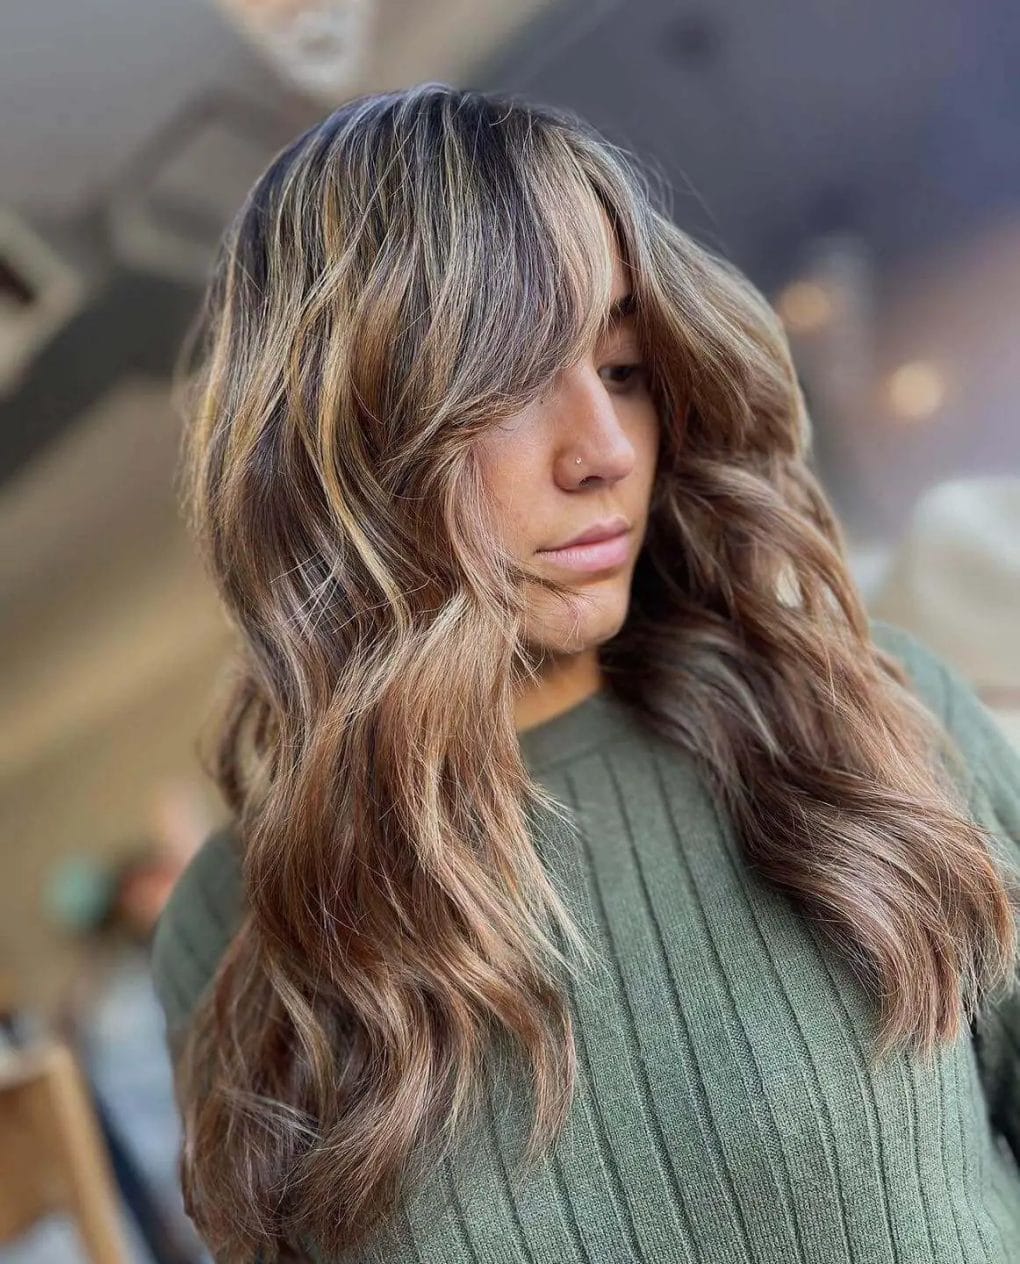 Lush voluminous look with blonde and light brown highlights on hair.